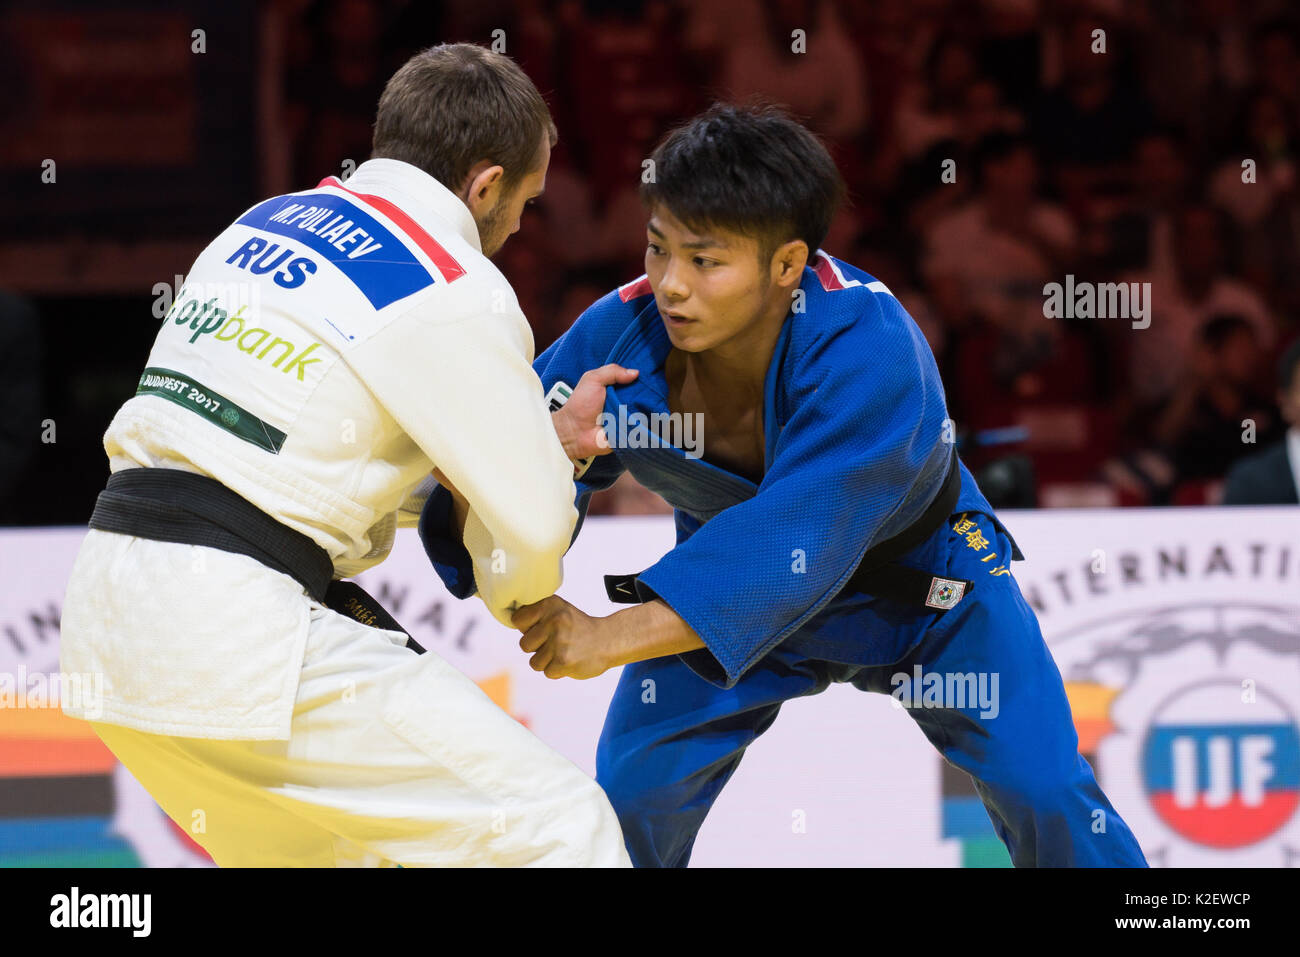 Budapest, Hungary. 29th Aug, 2017. Pauliaev Mikhail of Russia (white kimono)  and Abe Hifumi of Japan (blue kimono) during the fight in the -66kg  category at the Judo World Championship Budapest 2017